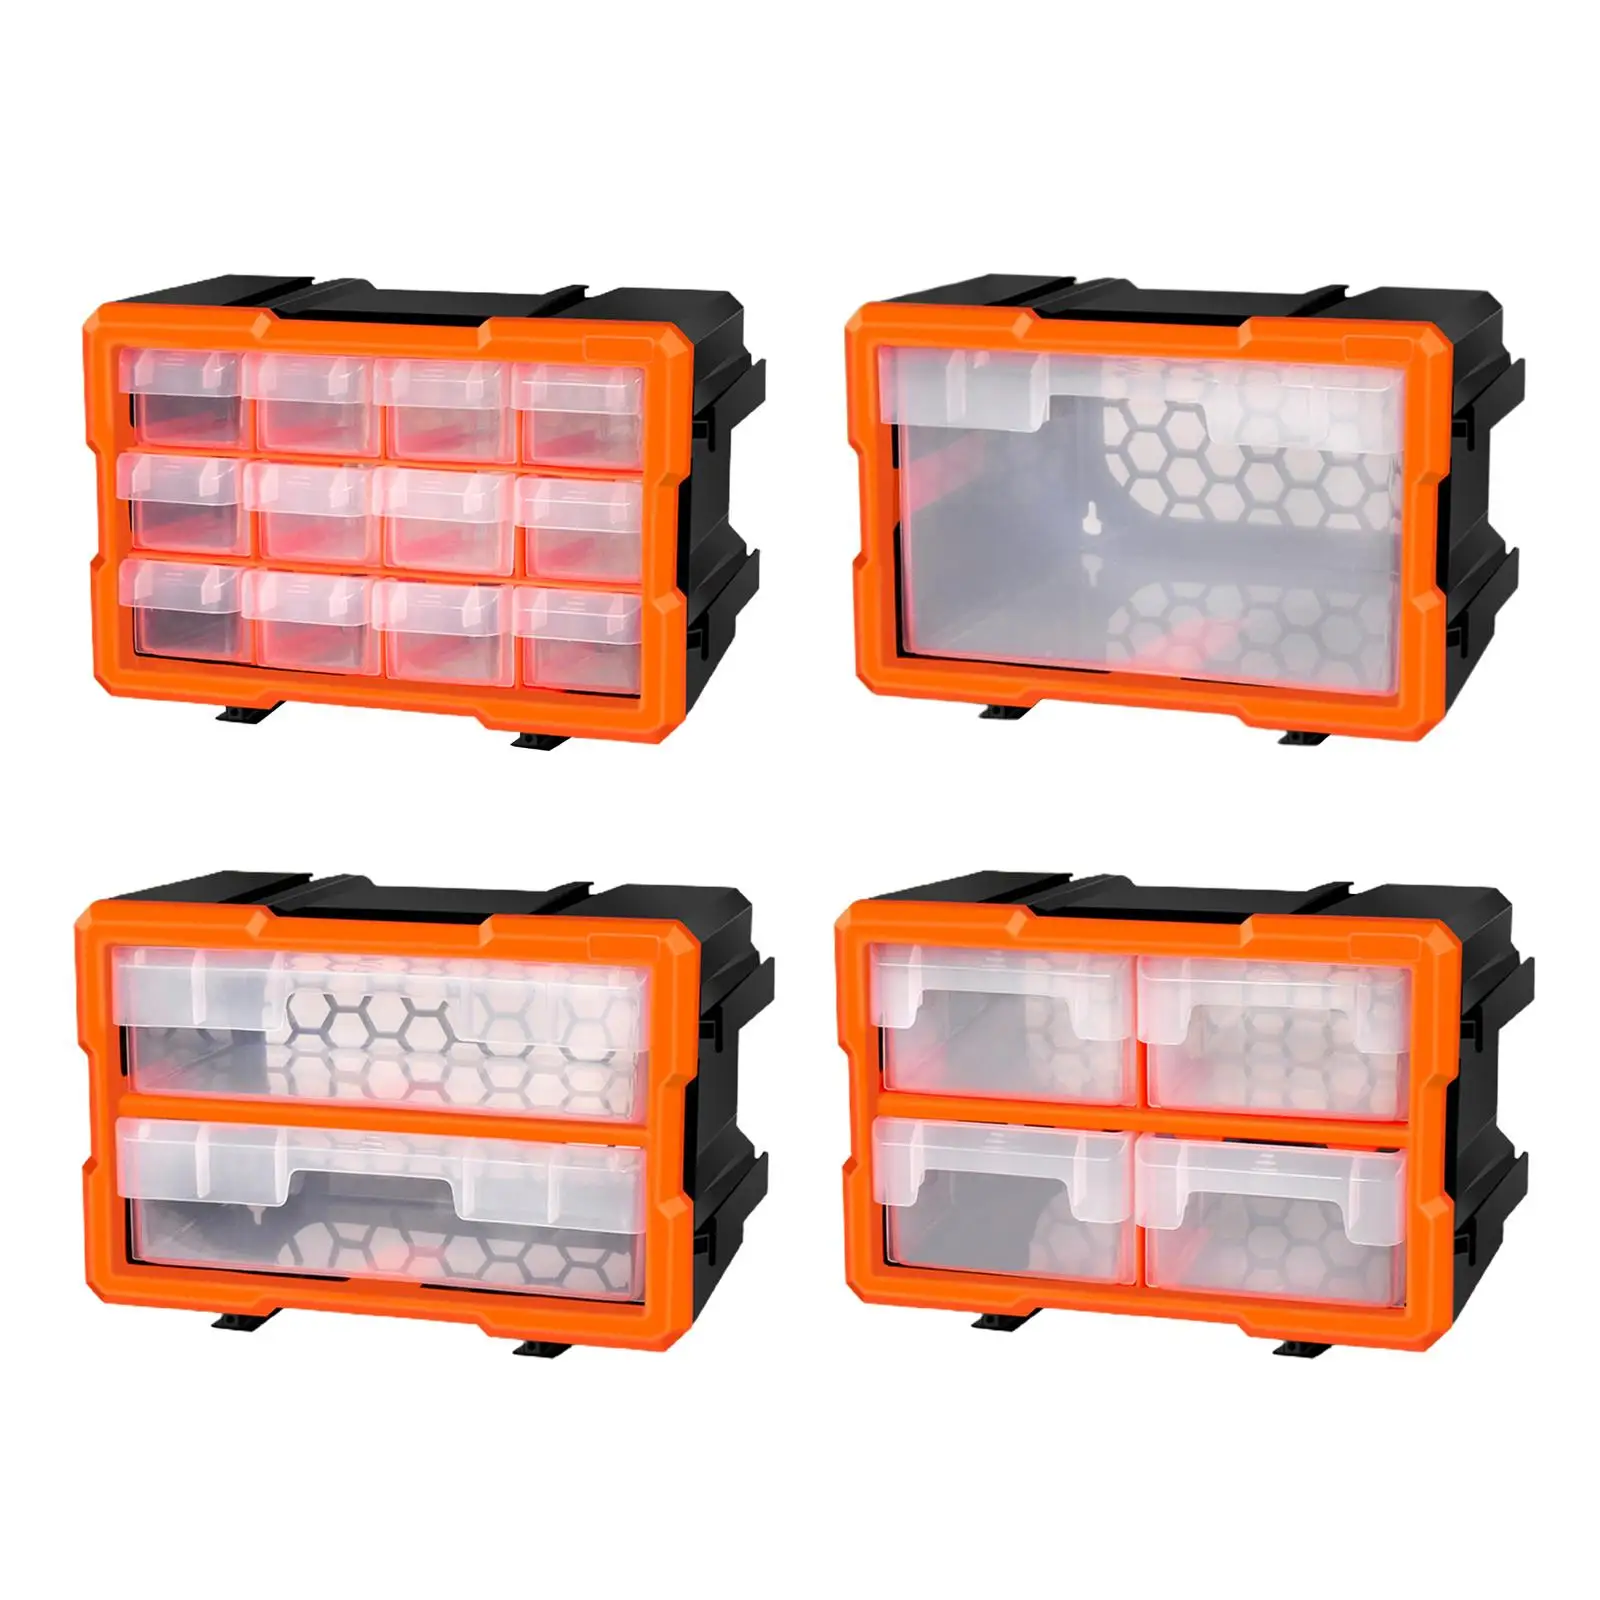  Storage Box Durable  with Compartments Excellent for Screws Nuts and Bolts